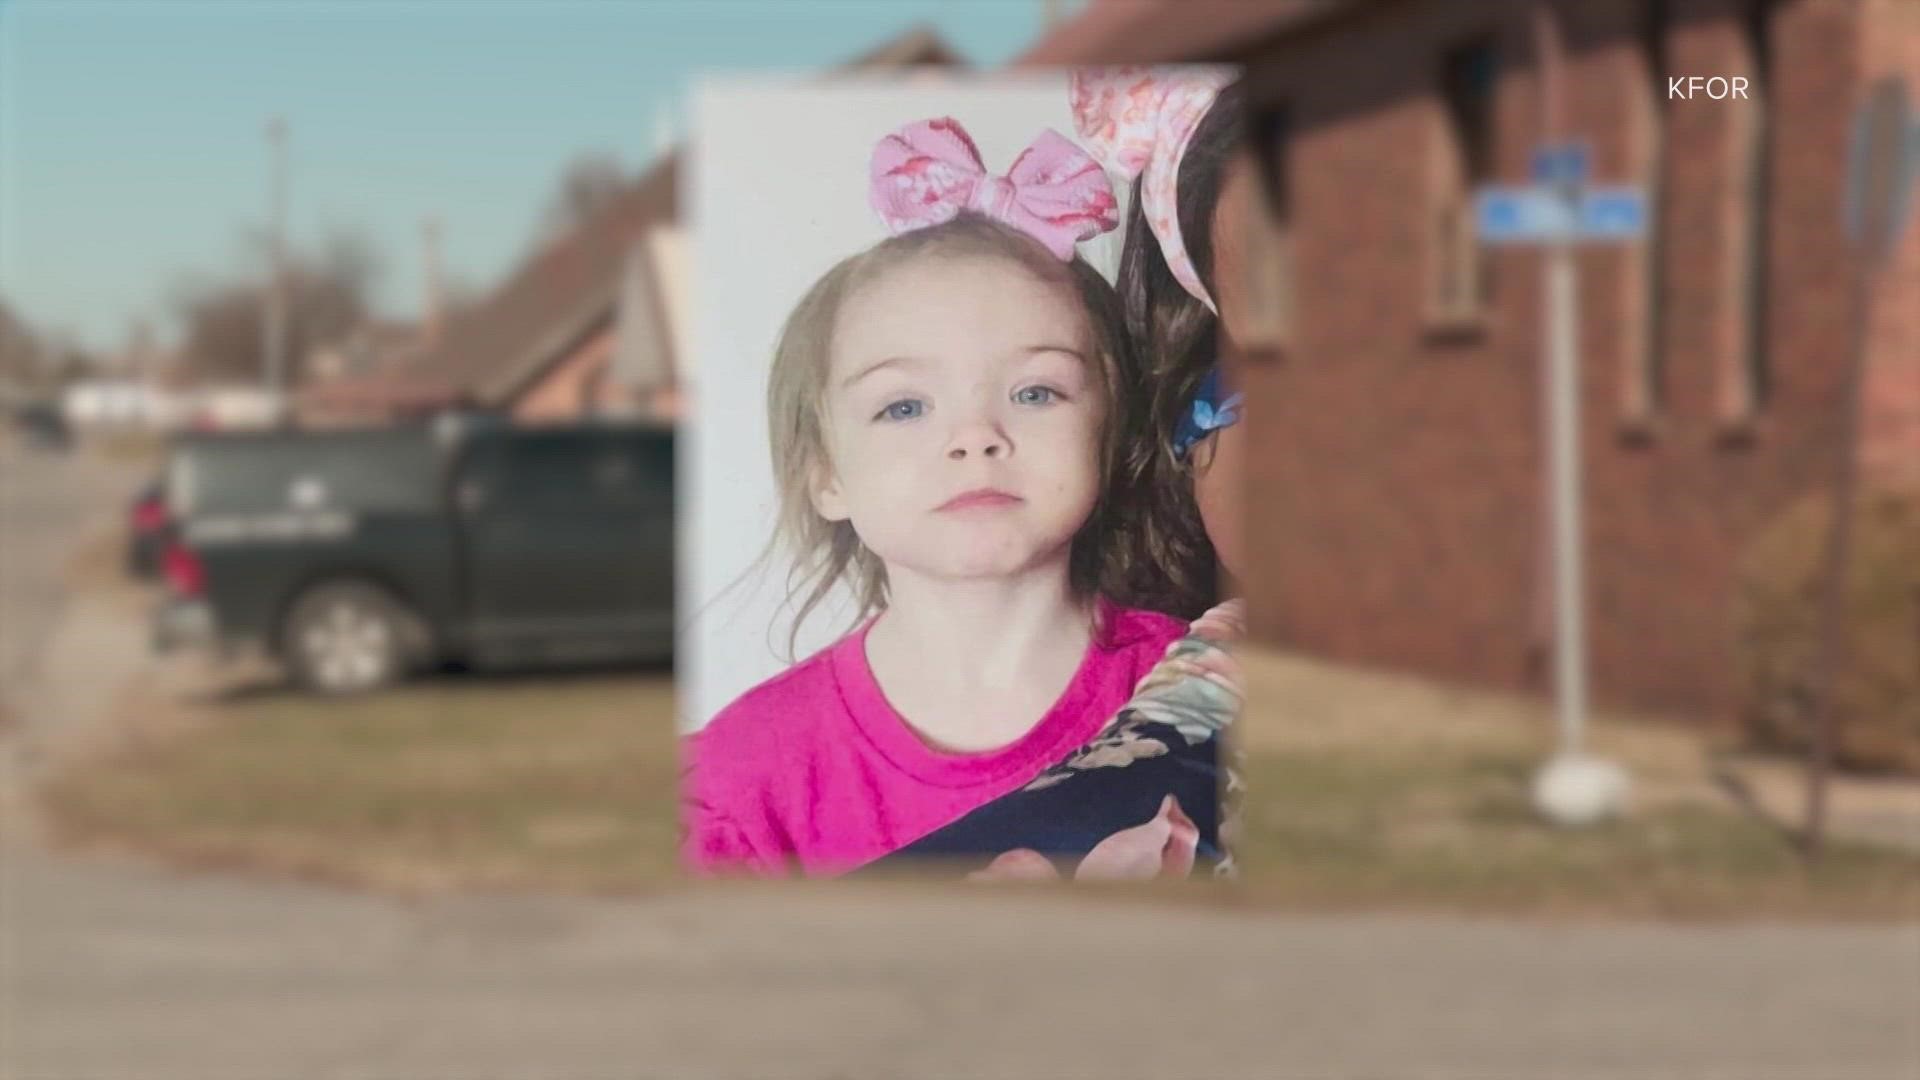 Ivon Adams is one of two caretakers being investigated in connection with the disappearance of Athena Brownfield, 4, in Cyril, Oklahoma.